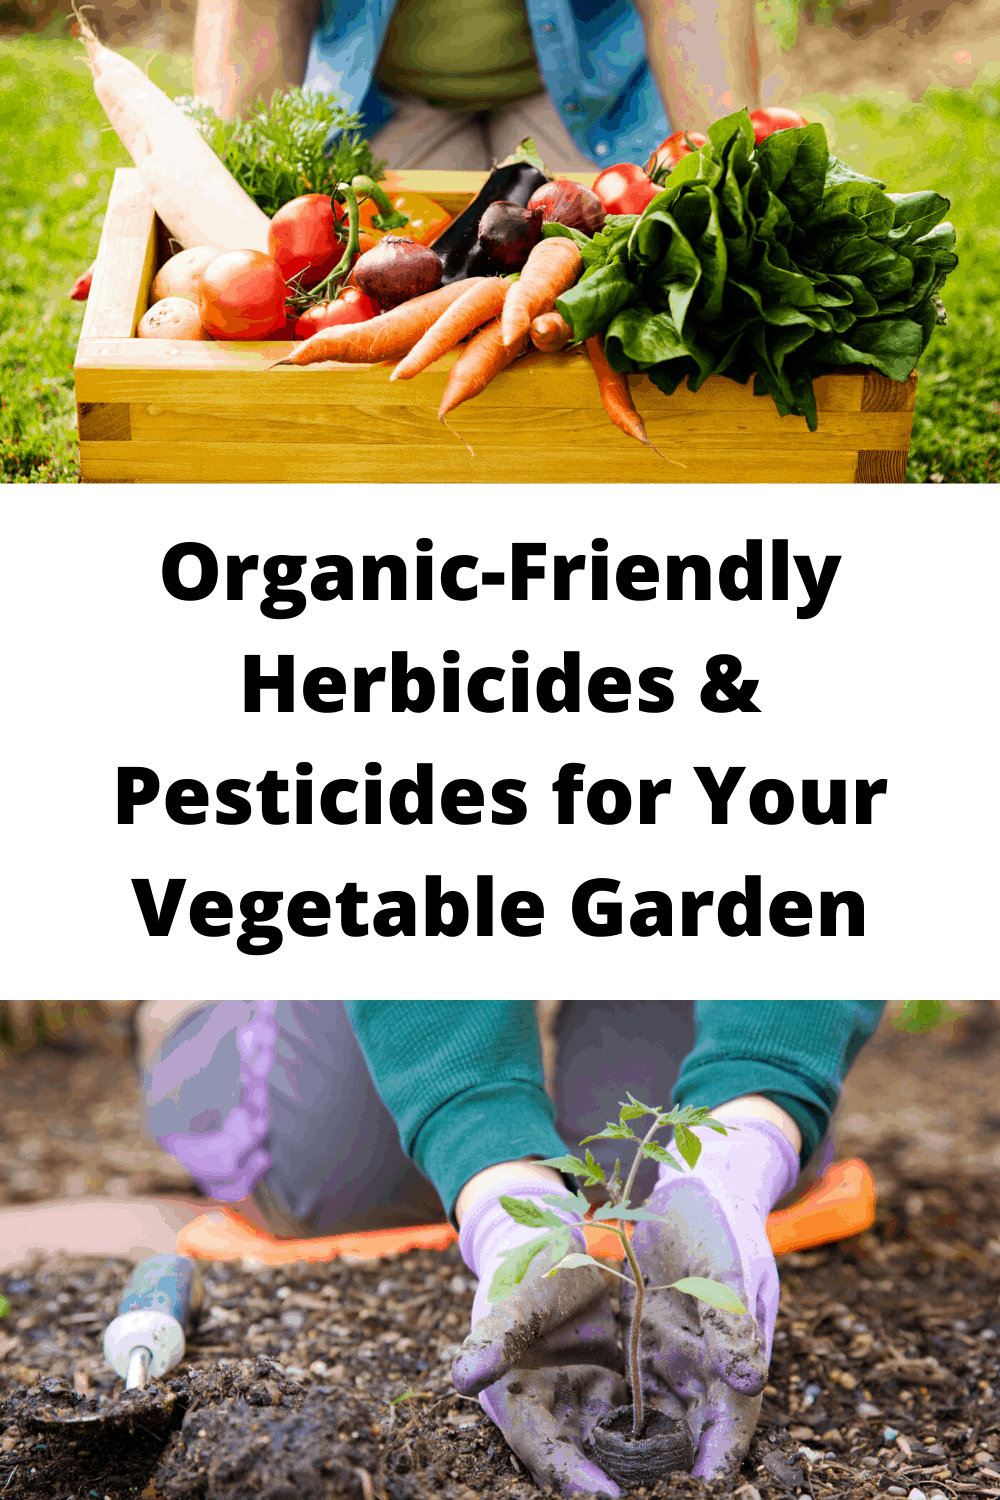 Organic-Friendly Herbicides & Pesticides for Your Vegetable Garden 5